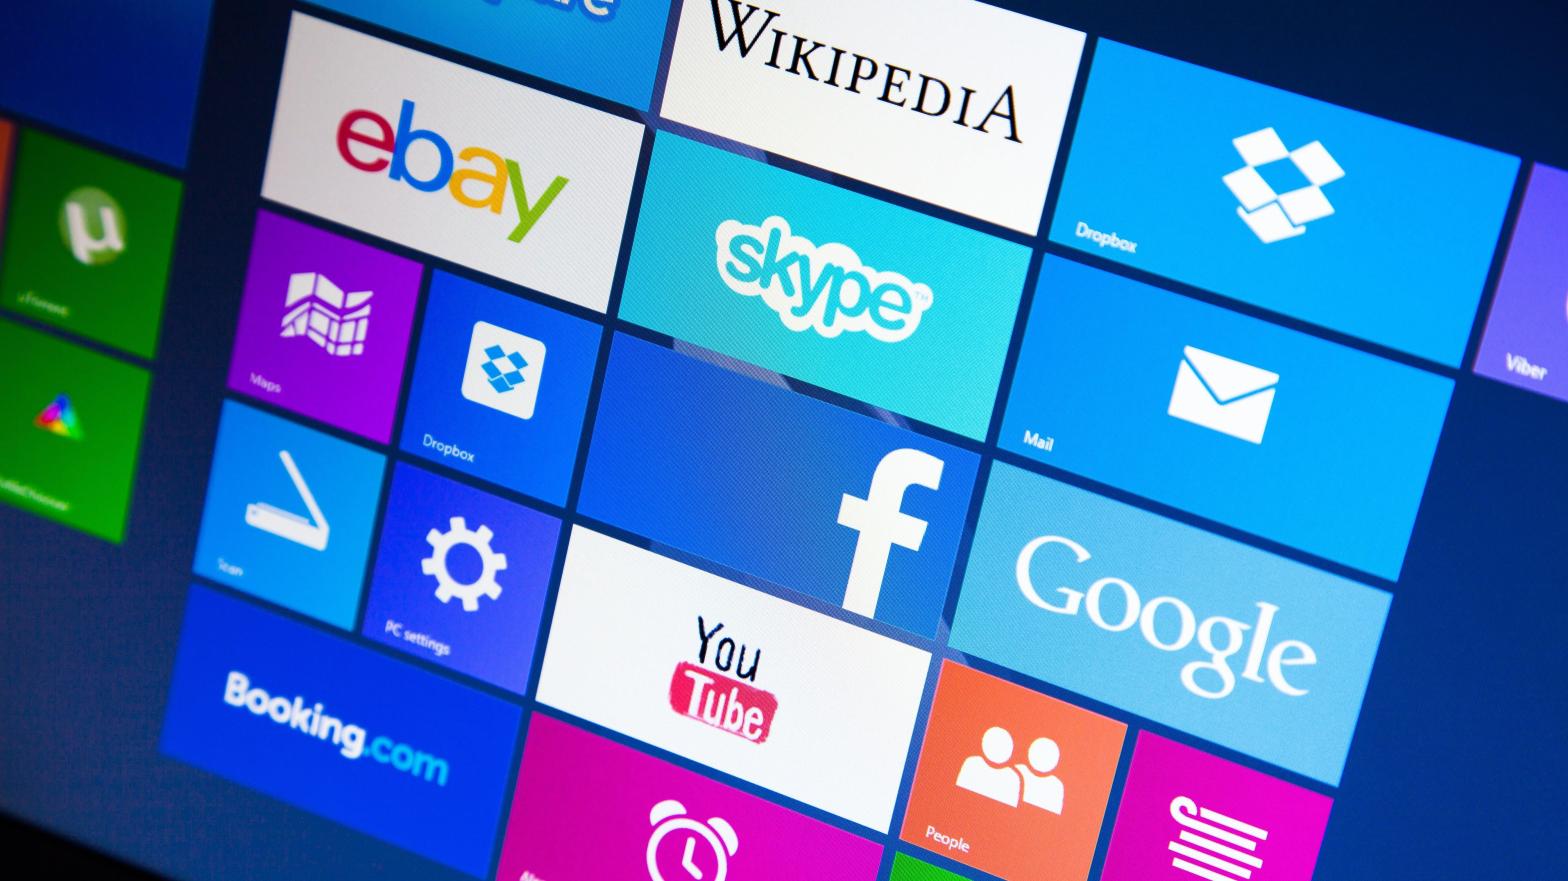 Windows 8 was known for its radical change to the OS app screen. Since then, Microsoft has reincorporated default features like the Start button in Windows 10 and 11. (Image: George Dolgikh, Shutterstock)